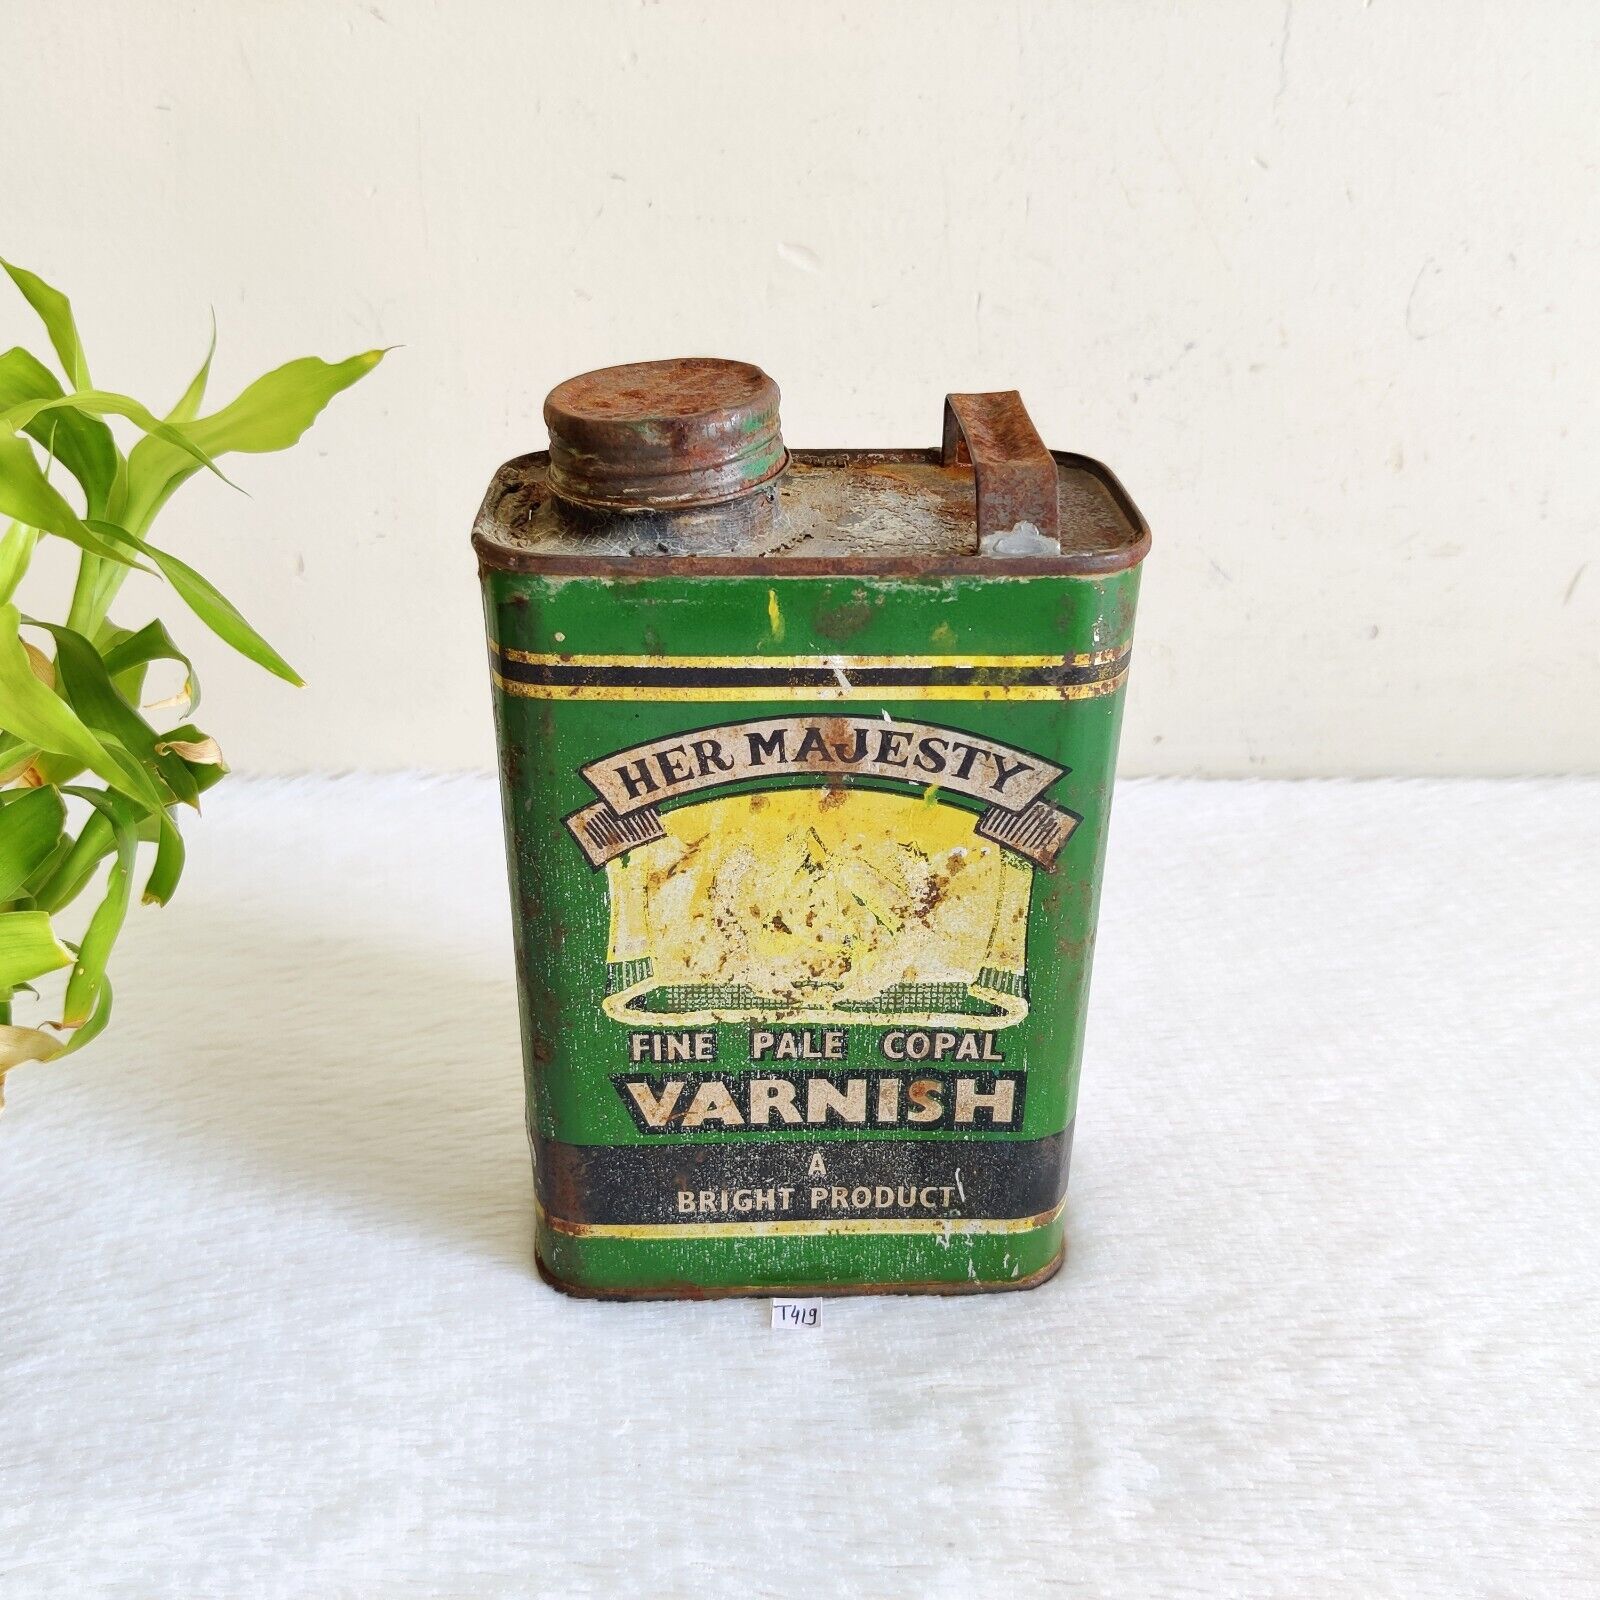 1950s Vintage Her Majesty Fine Pale Copal Varnish Advertising Tin Can Rare T419